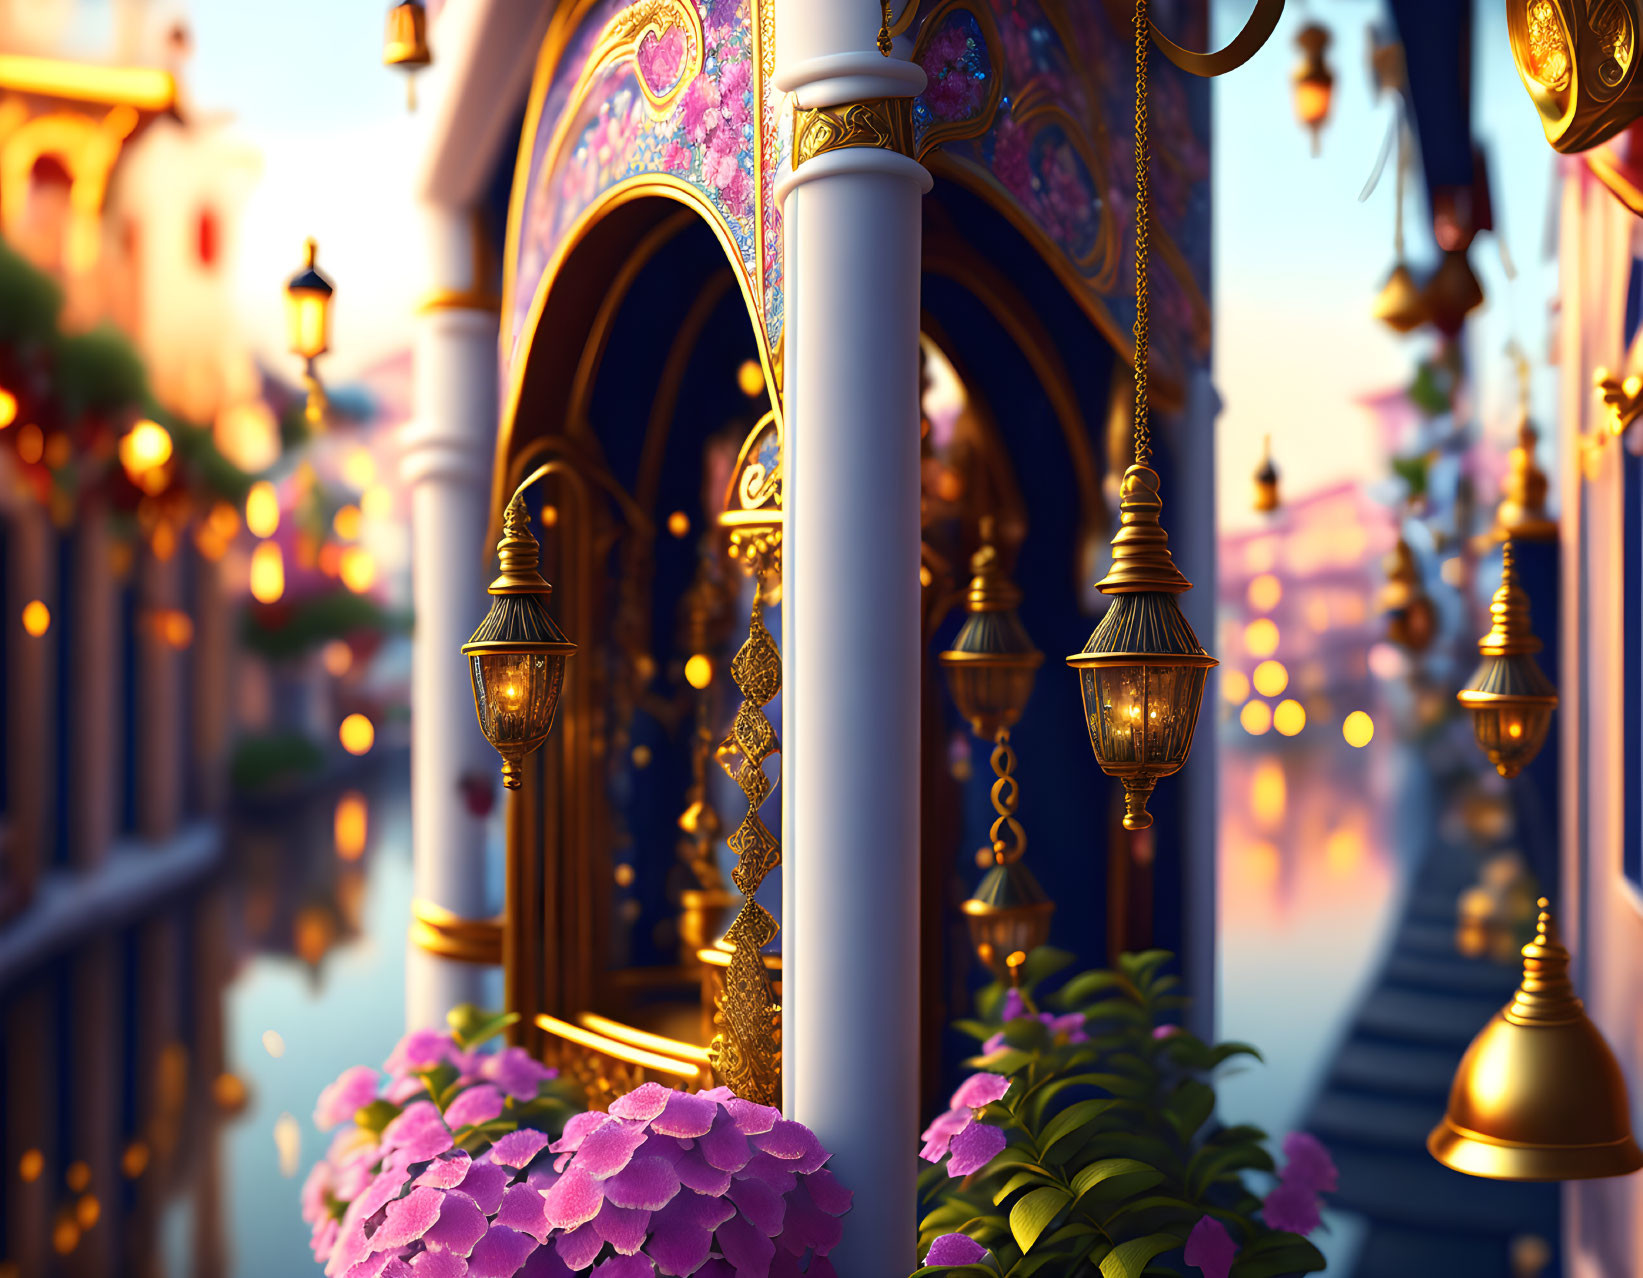 Colorful Street Scene with Ornate Lamps, Floral Architecture, and Twilight Reflections